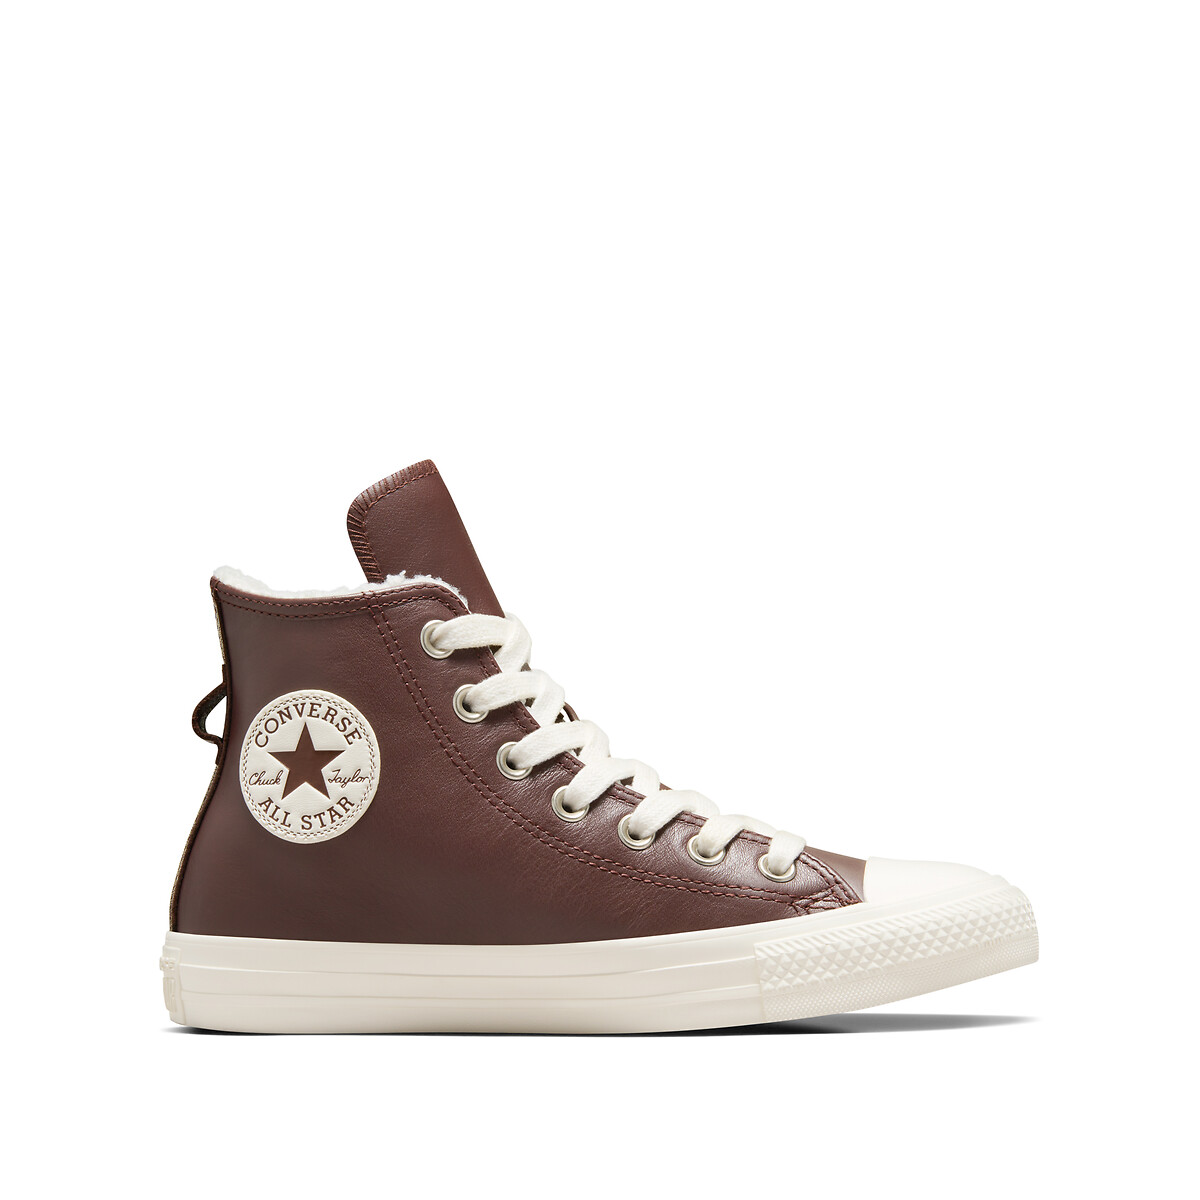 Chuck Taylor All Star Hi Warm Weather Leather High Top Trainers